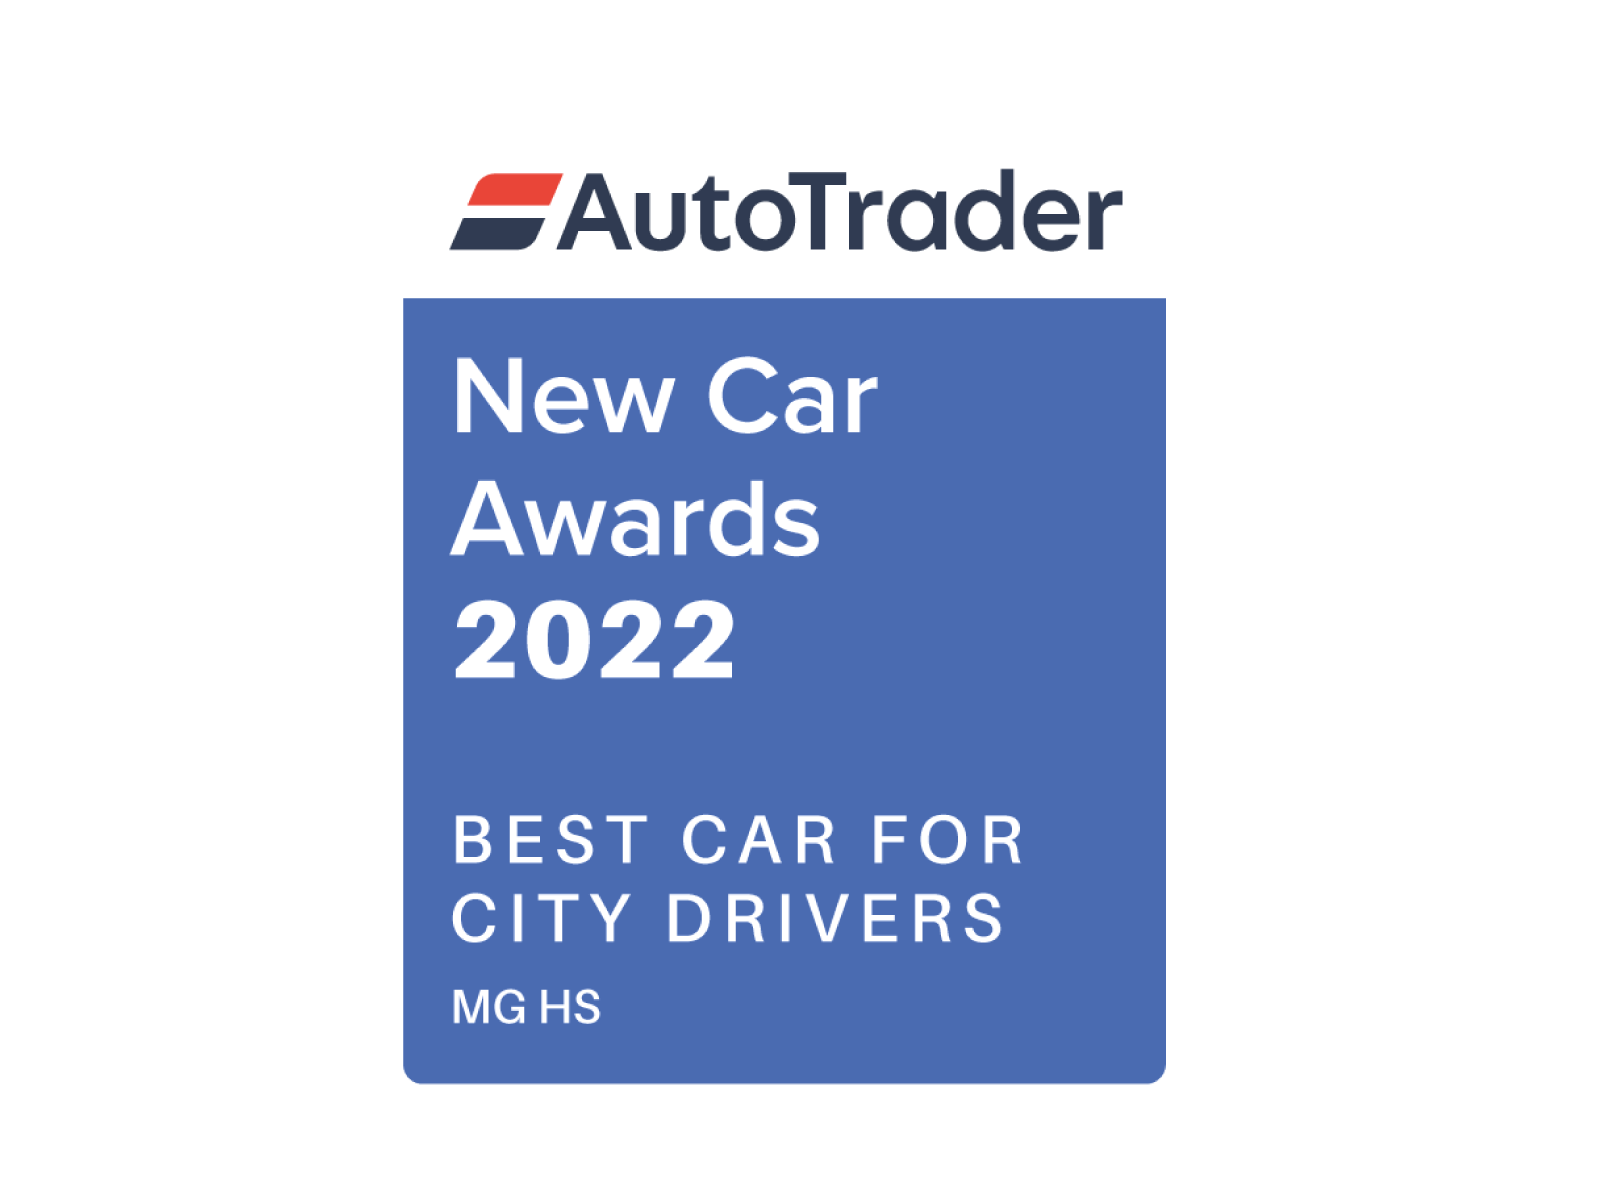 AutoTrader Best Car for City Drivers 2022 - MG HS